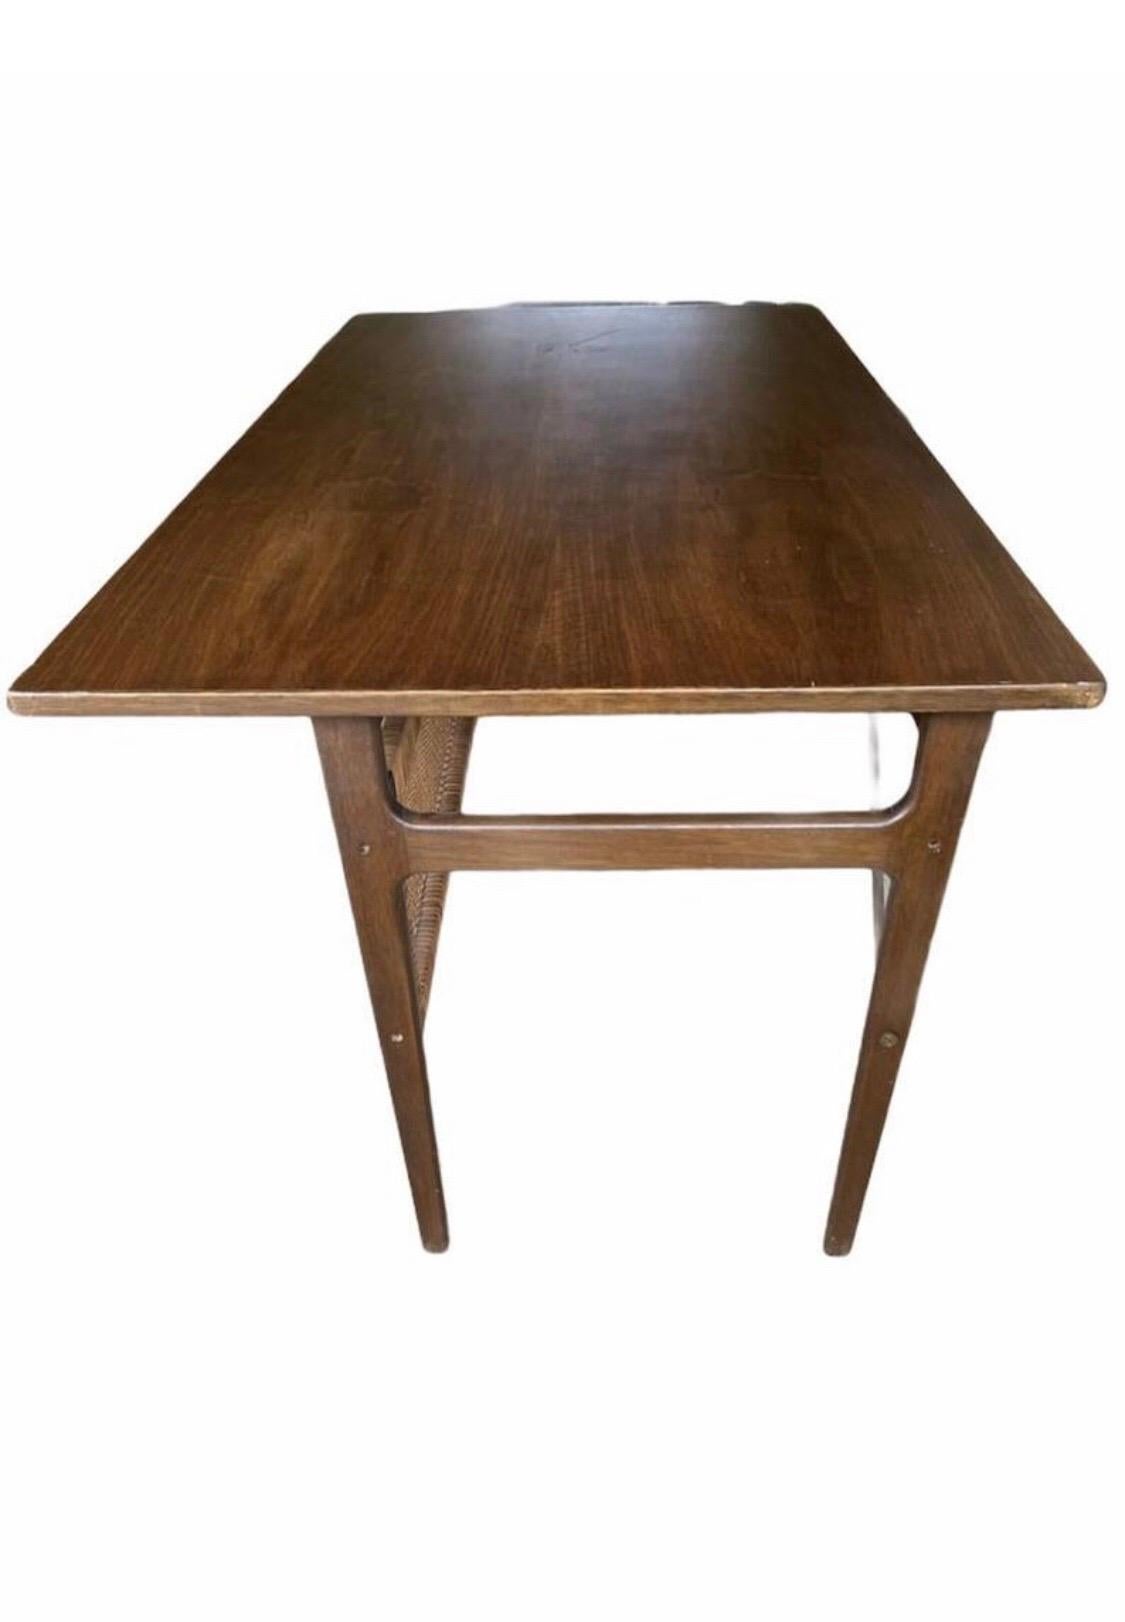 This beautiful Mid-Century Modern desk features sculpted metal pulls, a finished back, and a vintage walnut finish. A stylish design with a large top and plenty of room for storage within its five large drawers. This unique desk makes the perfect